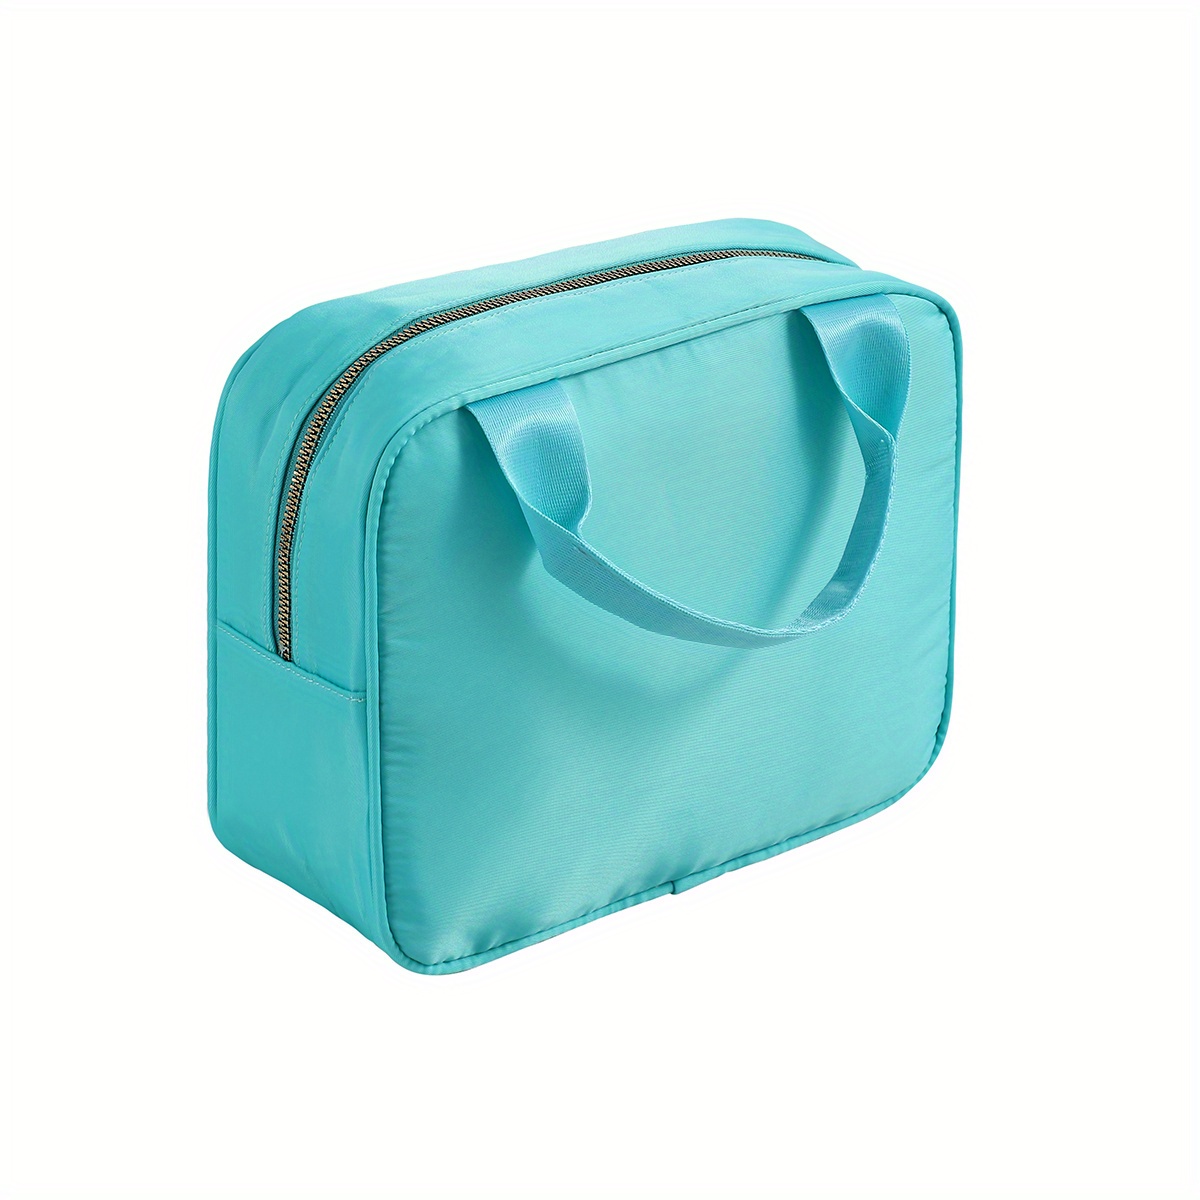 Insulated Lunch Box Tote Bag Travel Men Women Adult Hot Cold Food